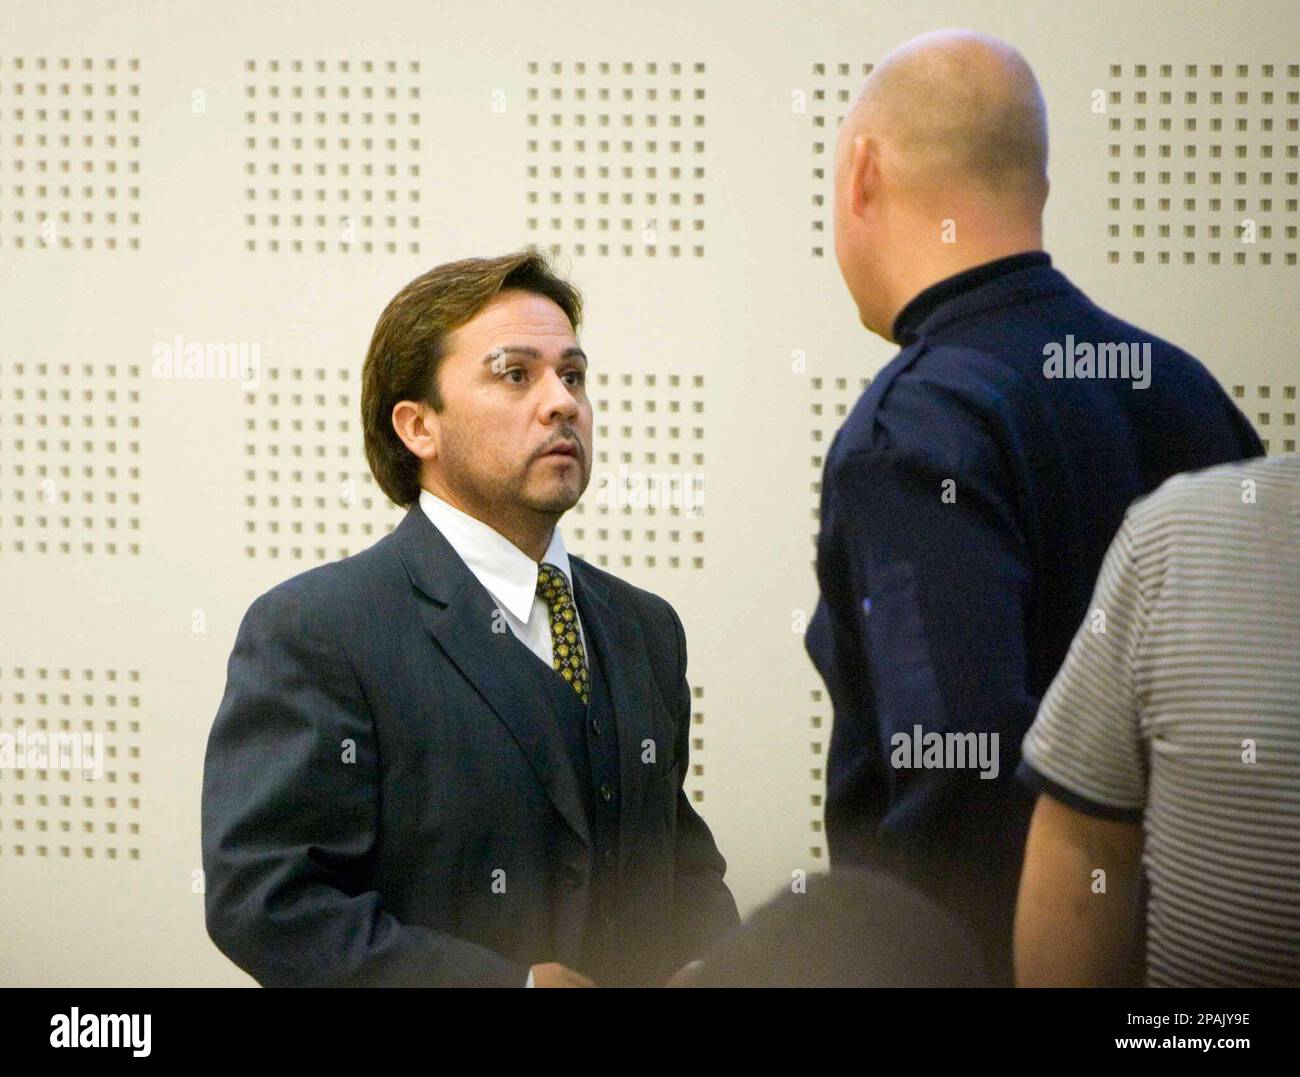 Chilean tenor Tito Beltran, left, talks to an unidentified man during the court hearing in Ystad, Sweden Wednesday Jan. 16, 2008. The 42-year-old opera star, who lives in Sweden, stands trial accused of raping a nanny employed by a Swedish actress in a hotel room in southern Sweden in 1999. (AP Photo/Drago Prvulovic) ** SWEDEN OUT ** Stockfoto